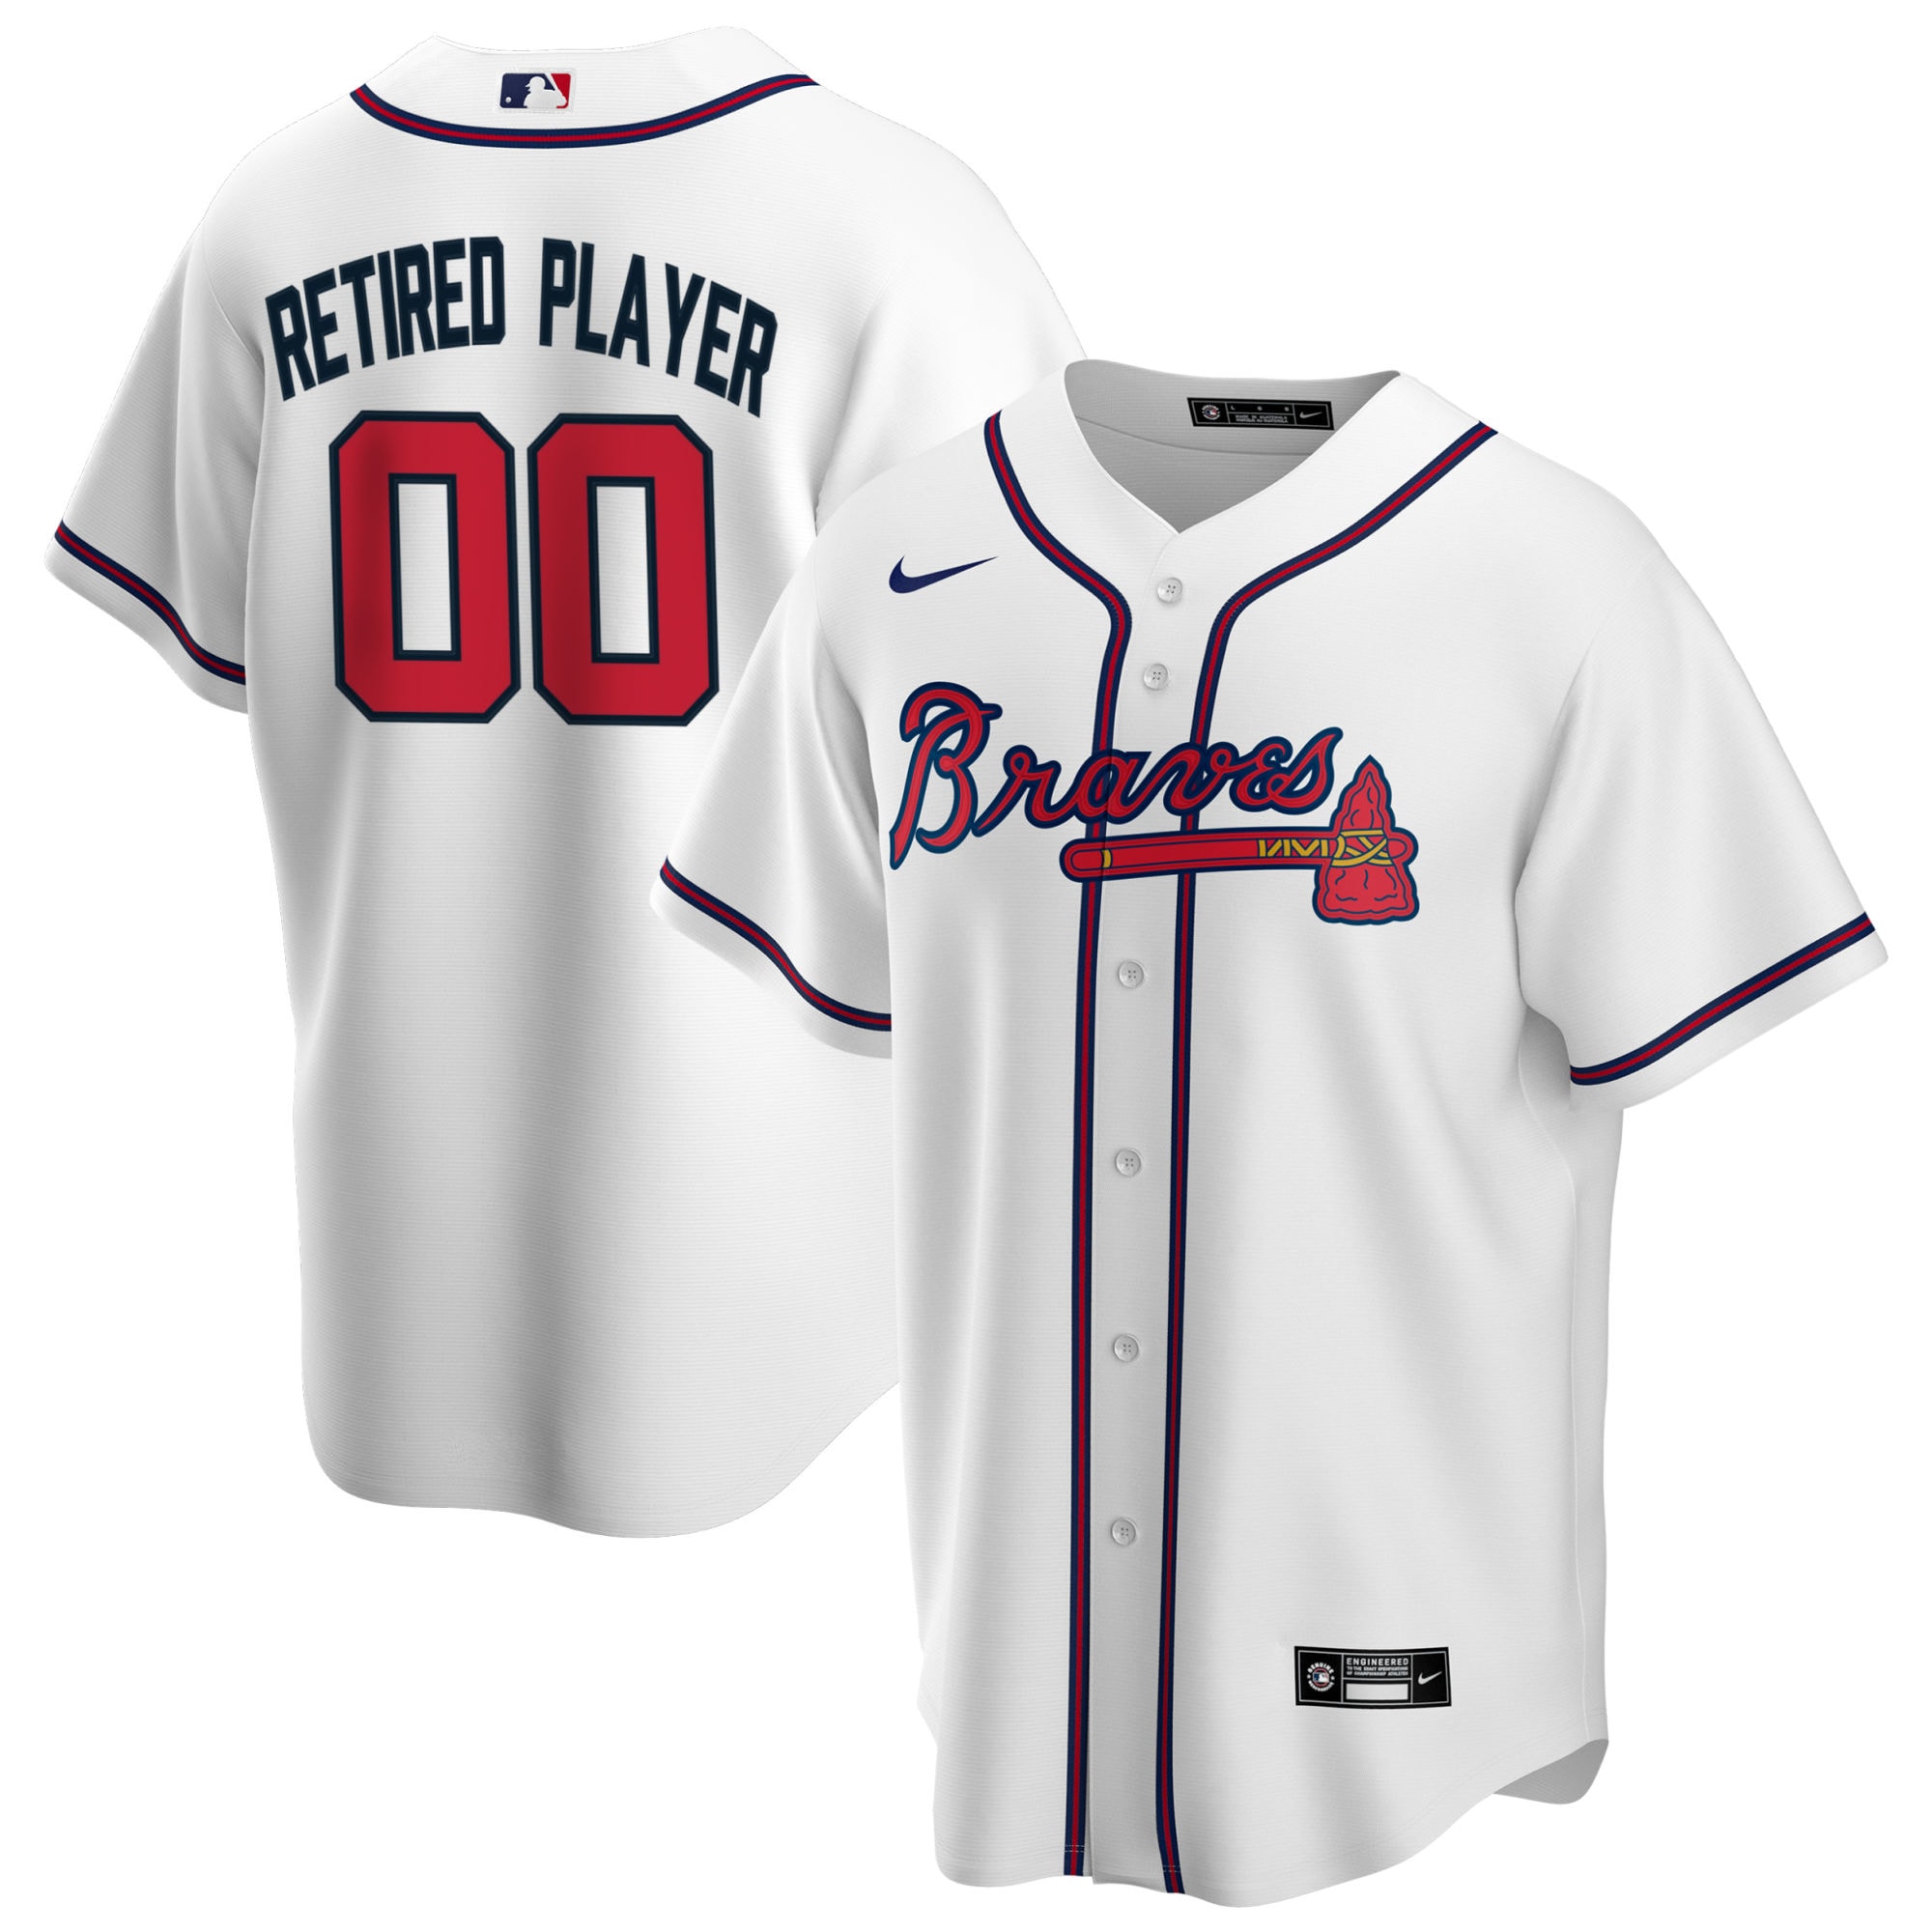 Men's Atlanta Braves Stitches Royal Cooperstown Collection Team Jersey